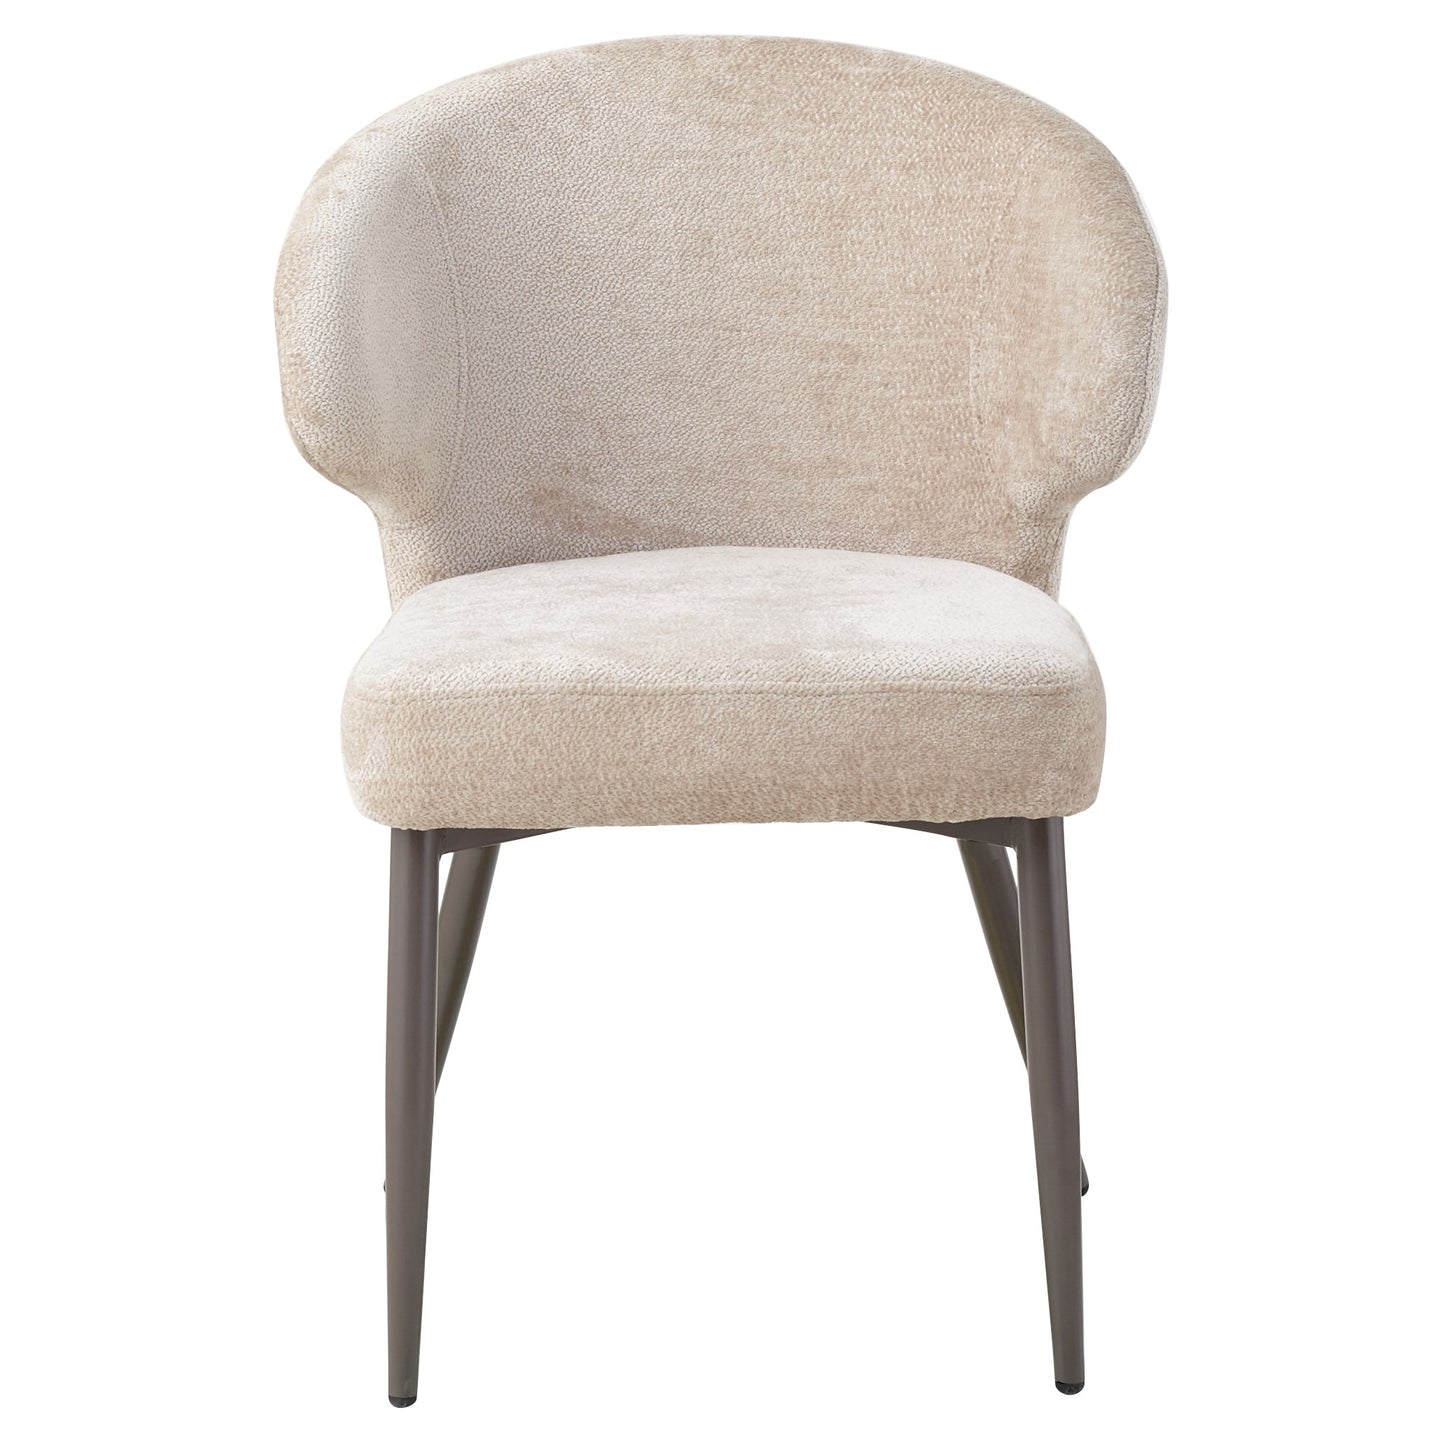 Ares Grey dining chair aphrodite 7 mocco clay leg